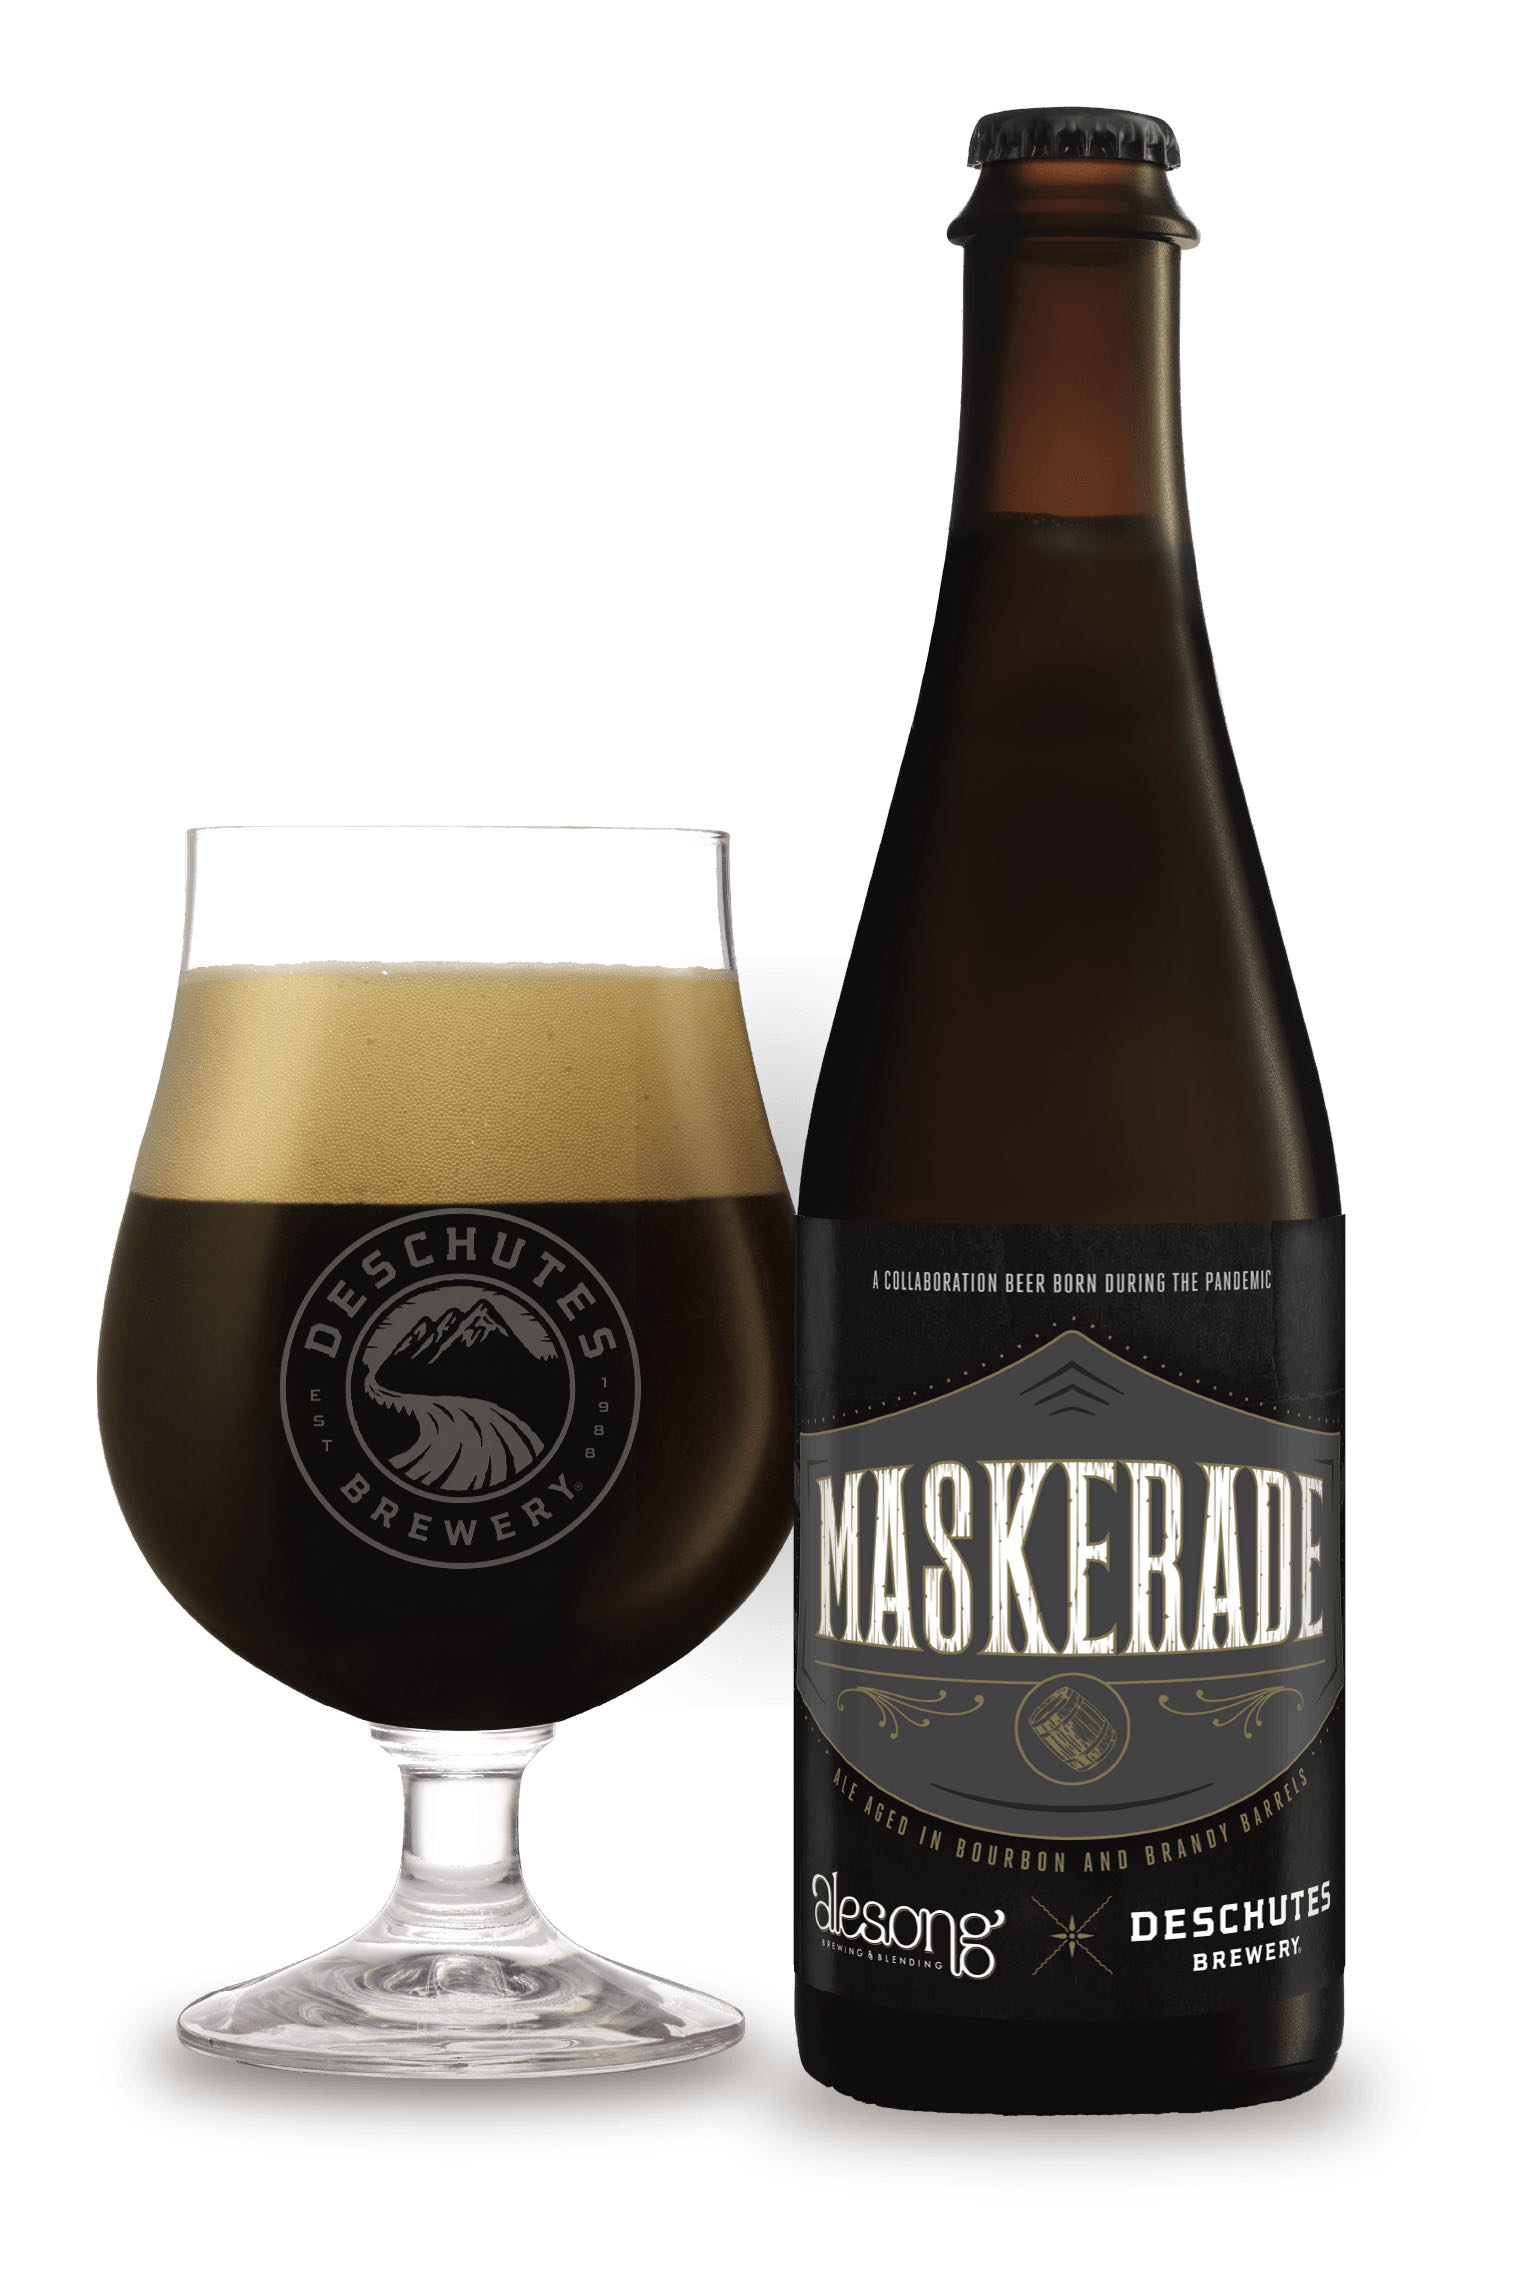 Deschutes Brewery and Alesong Brewing Maskerade 500ml bottle and snifter